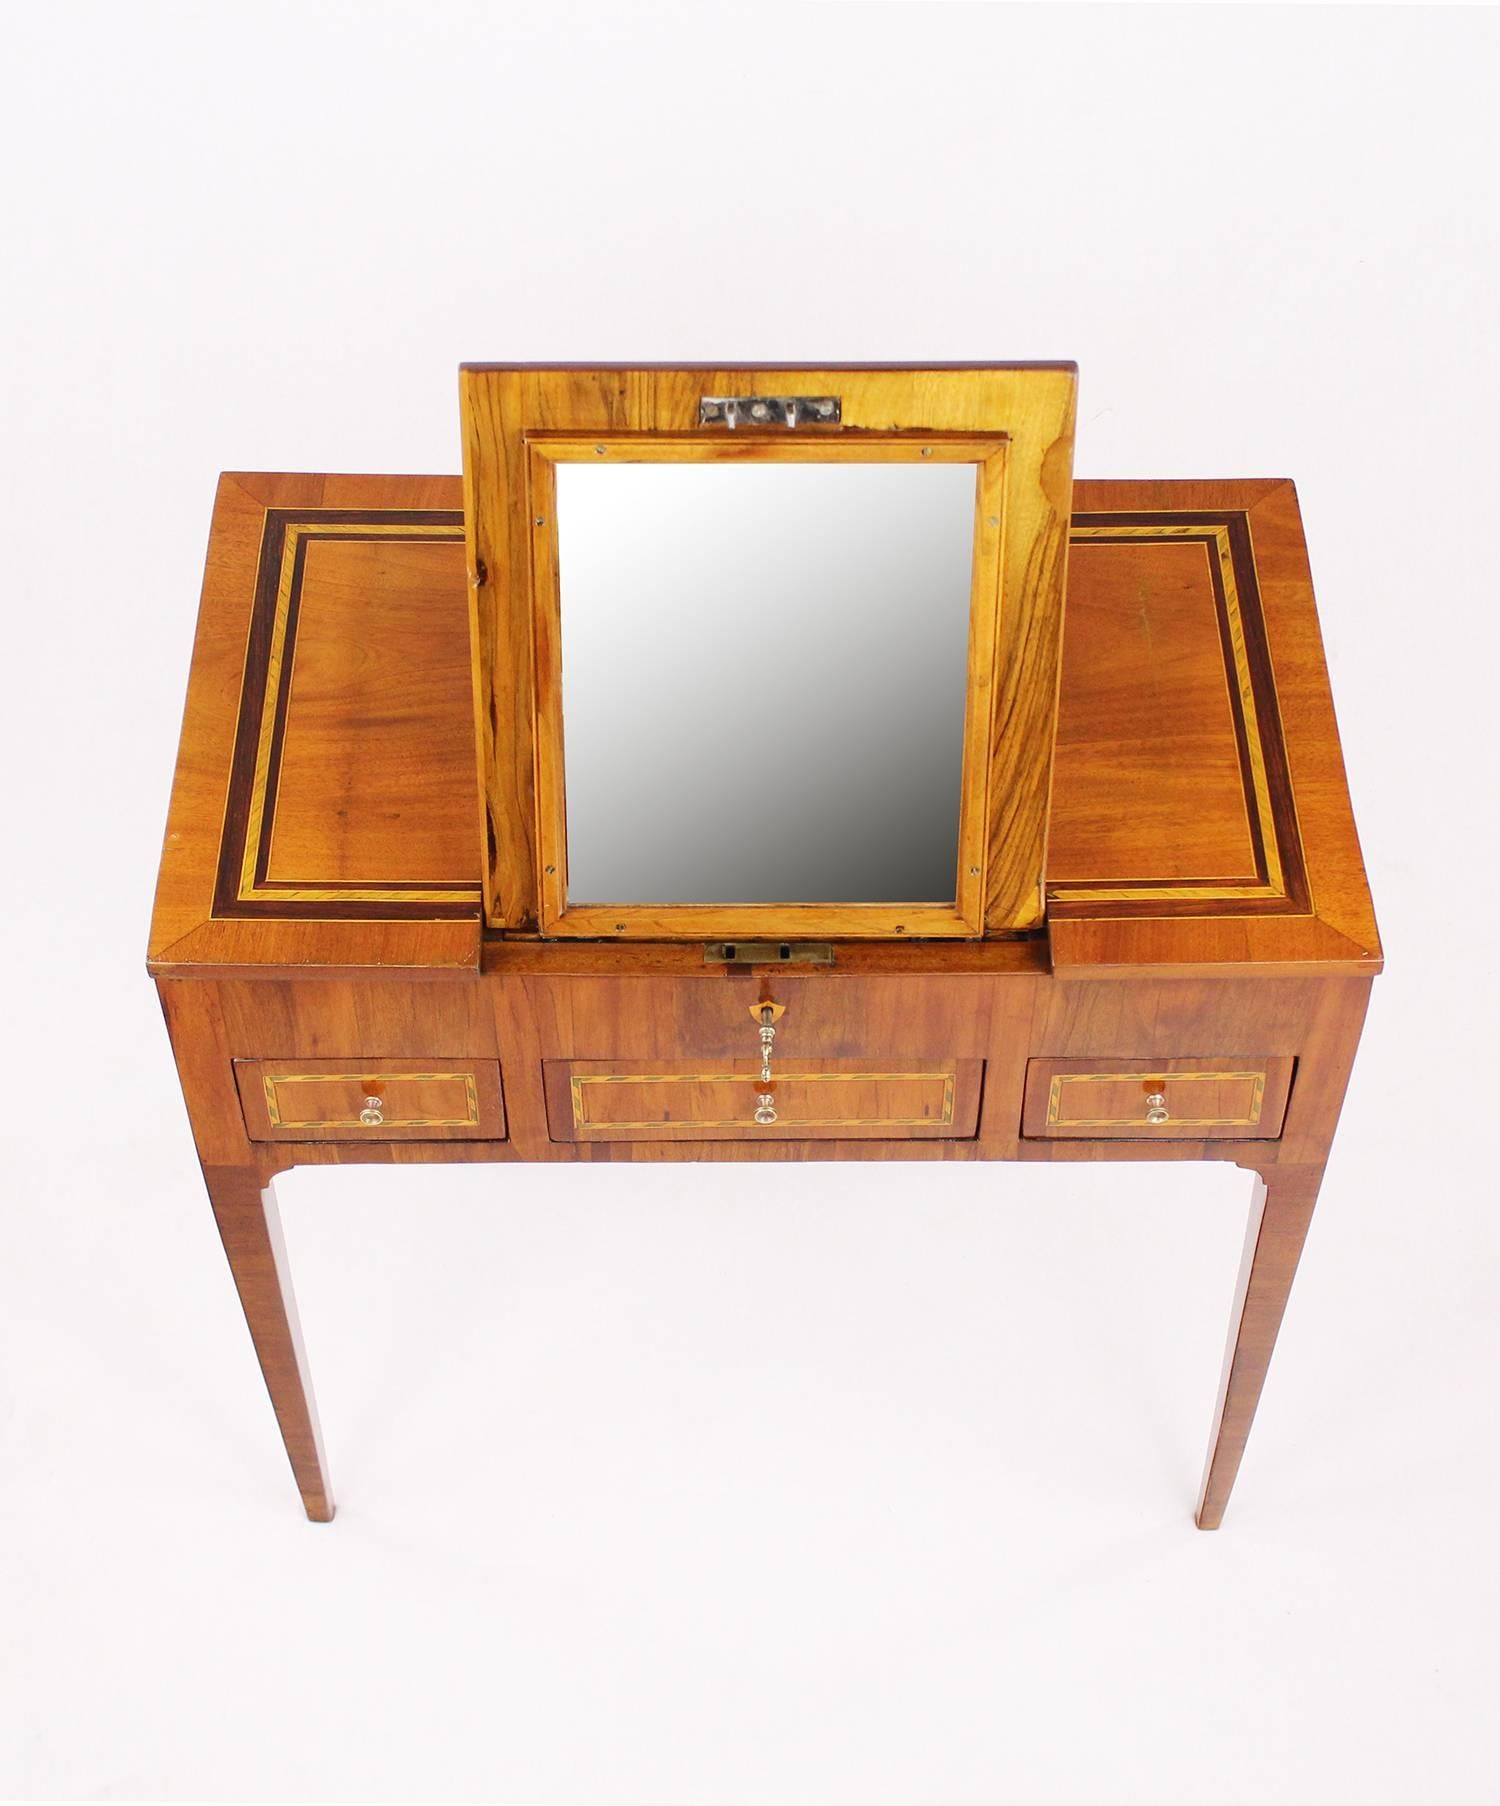 French Early 19th Century Dressing Table, Poudreuse, Mahogany Veneered, Marquetry Works